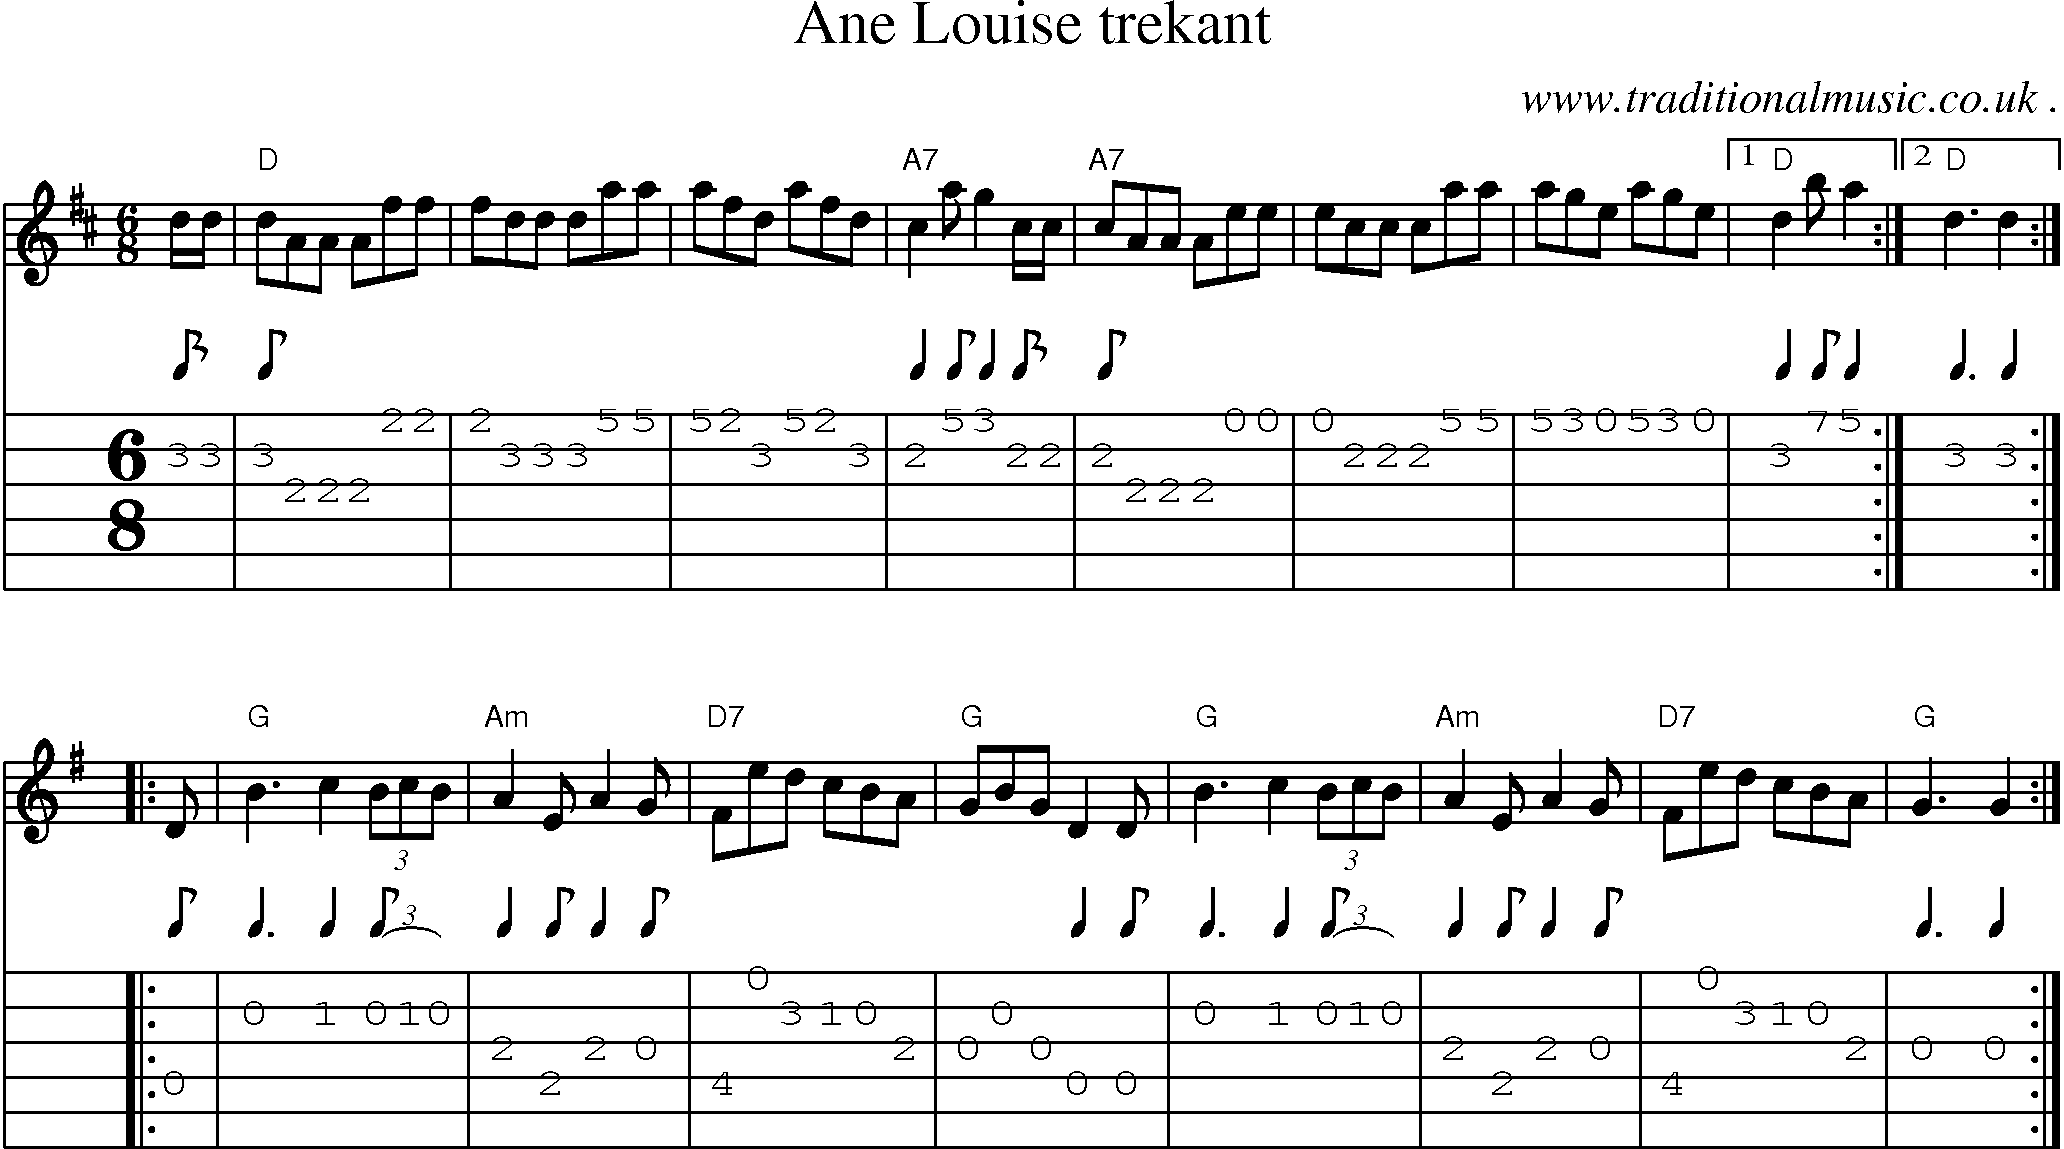 Sheet-music  score, Chords and Guitar Tabs for Ane Louise Trekant